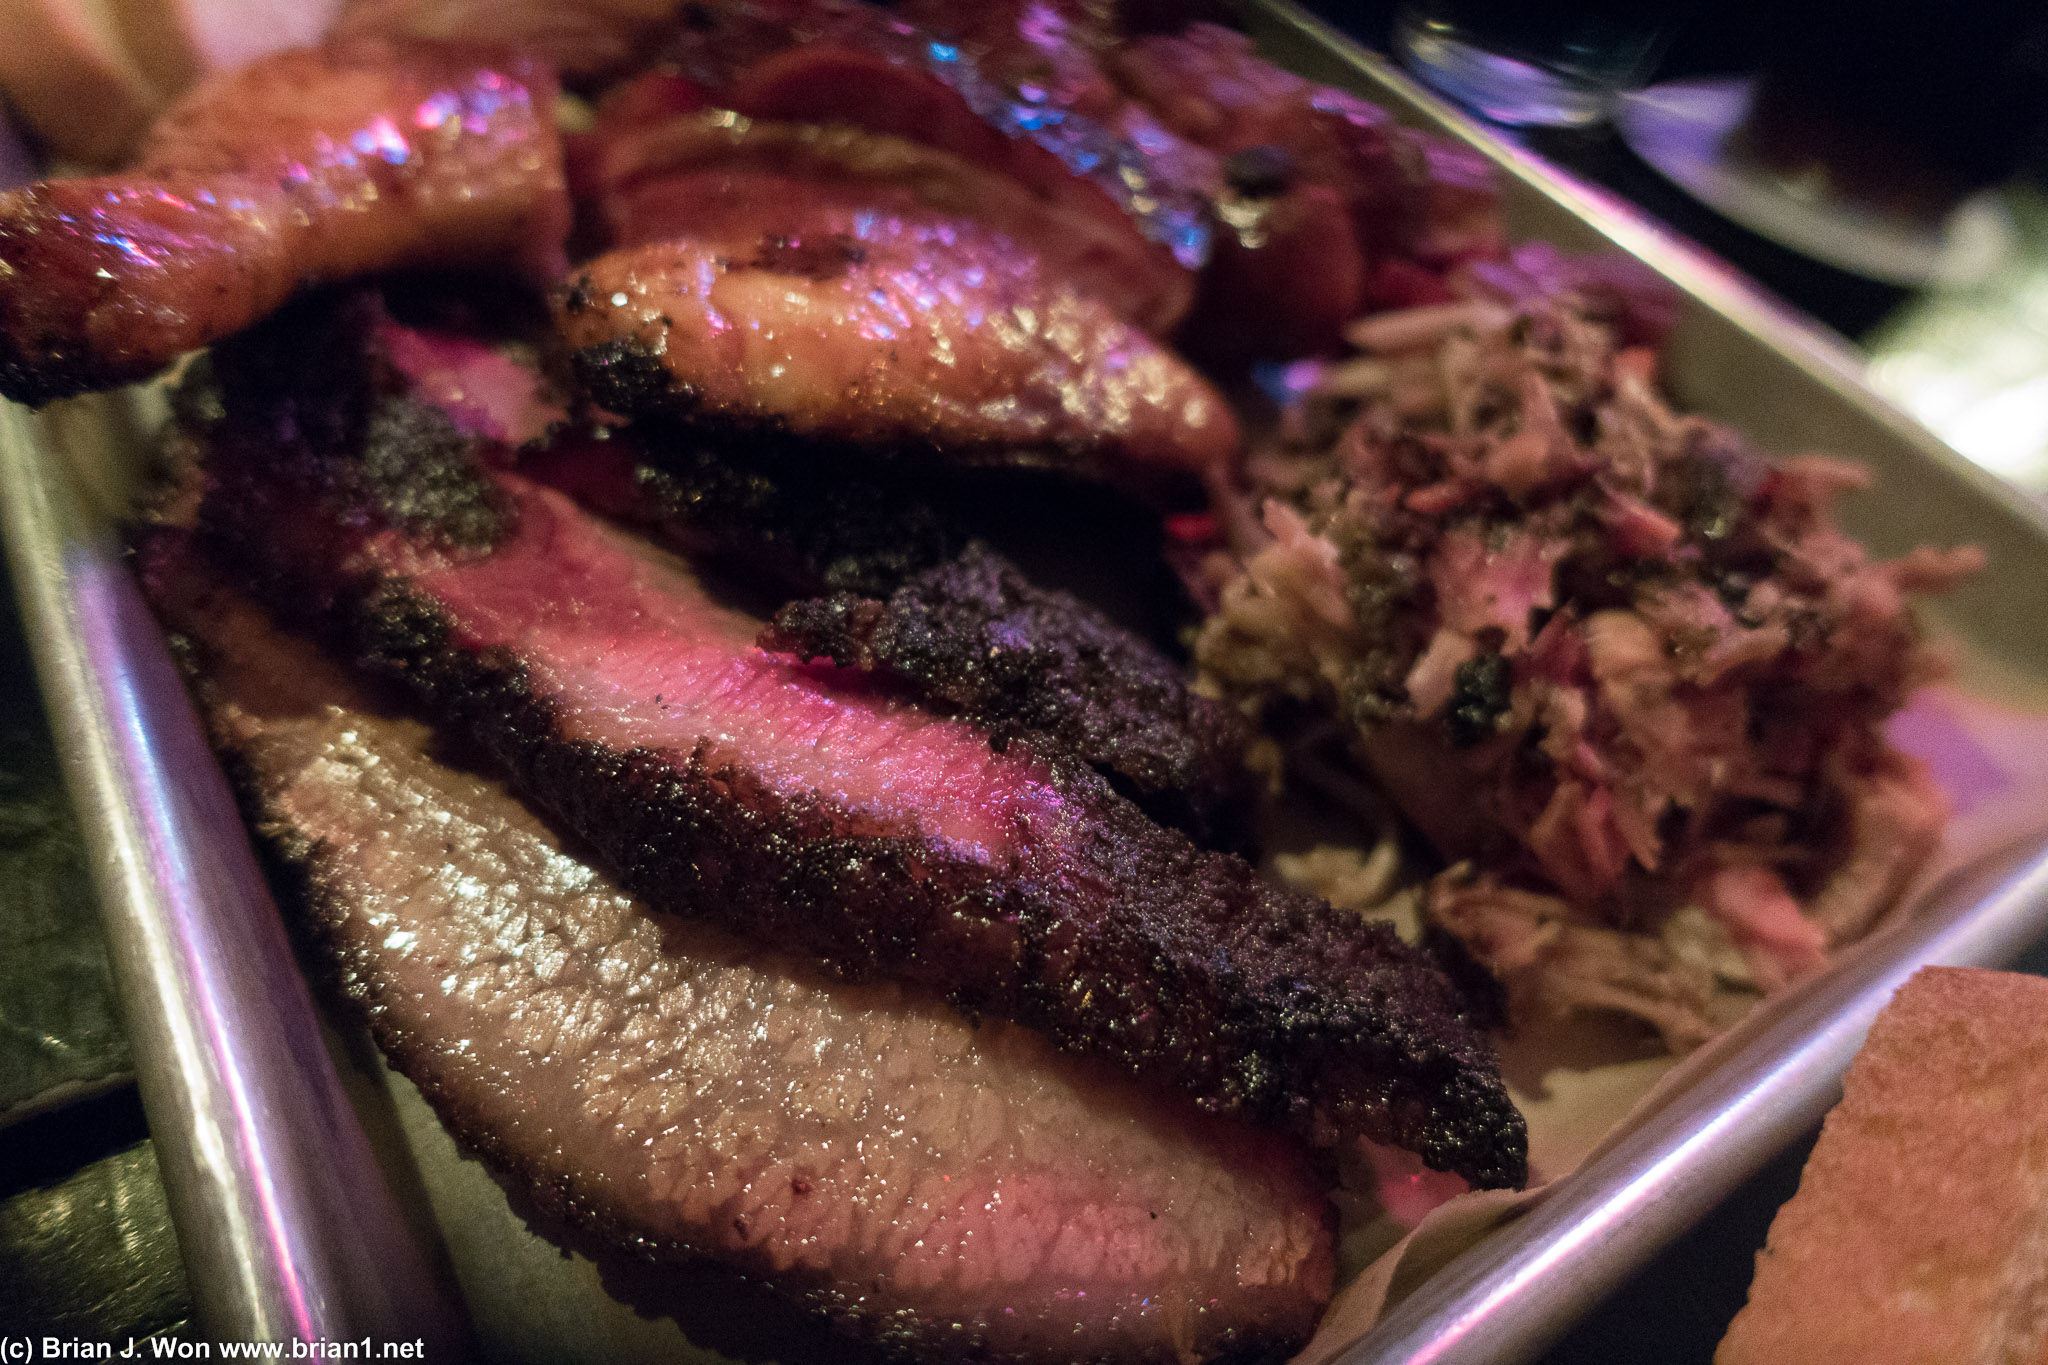 And brisket! A little chewy, which could be good or bad depending on your preference.